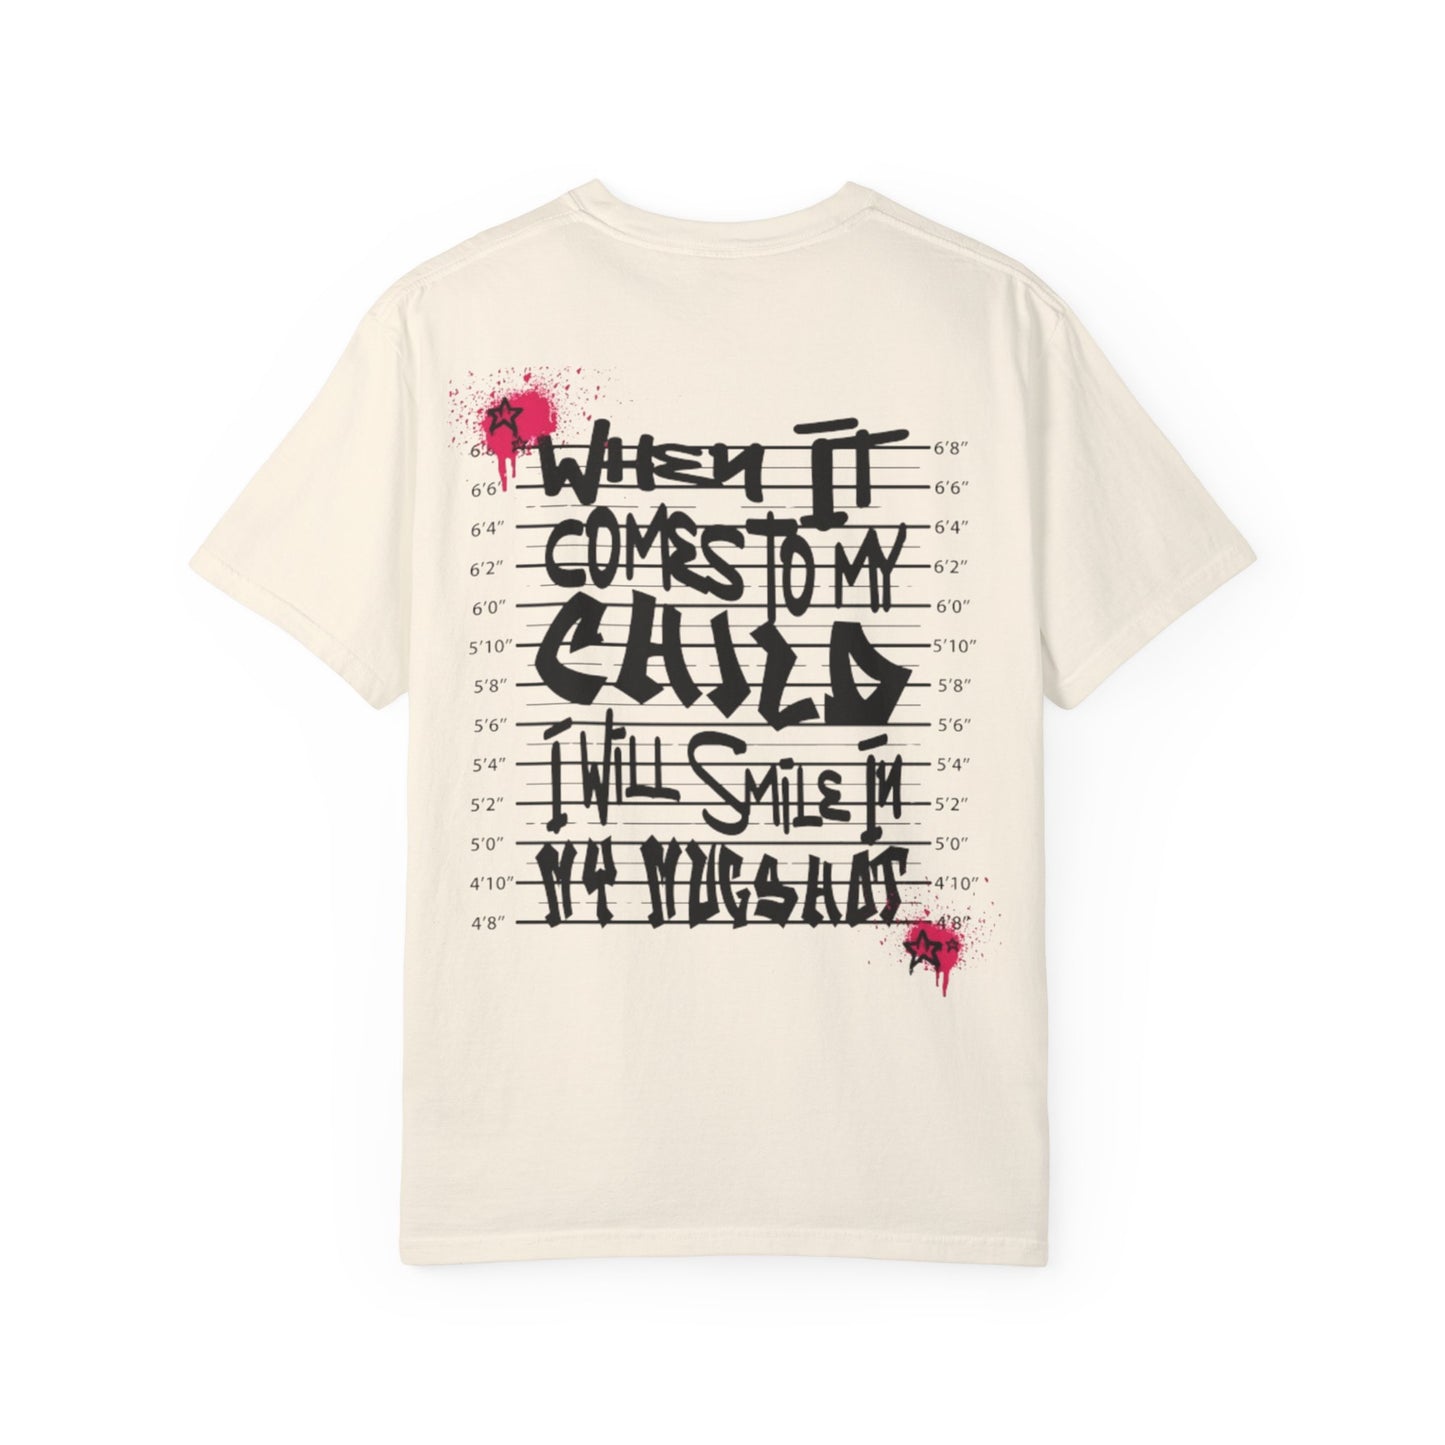 When It Comes to My Child - Unisex Garment-Dyed T-shirt